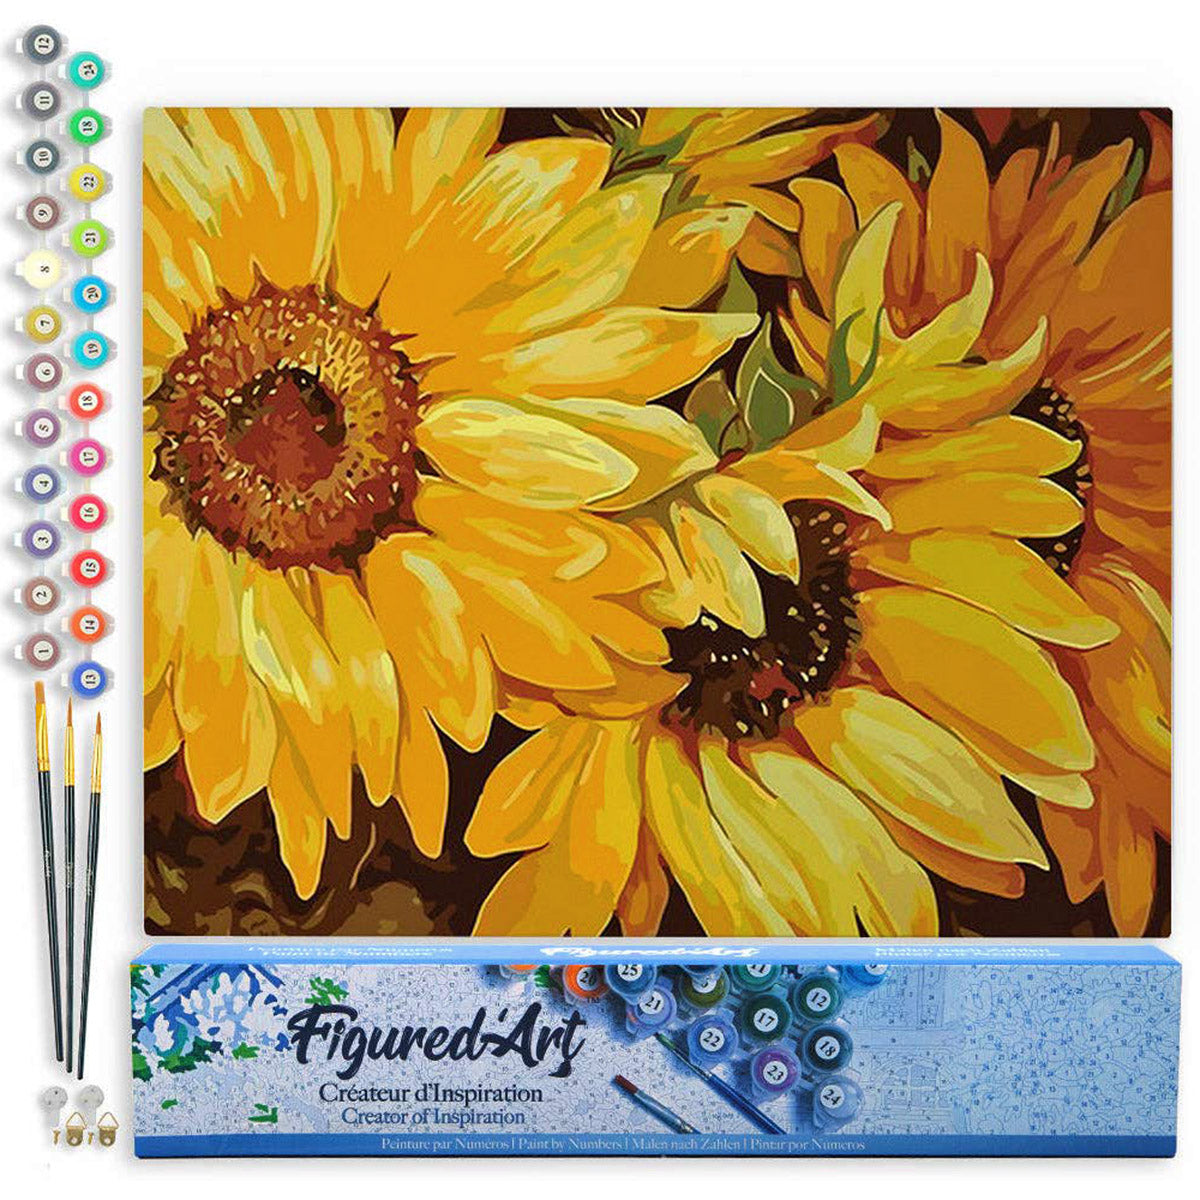 Paint By Numbers 16 x 20 Linen Canvas - Sunflowers In Full Bloom